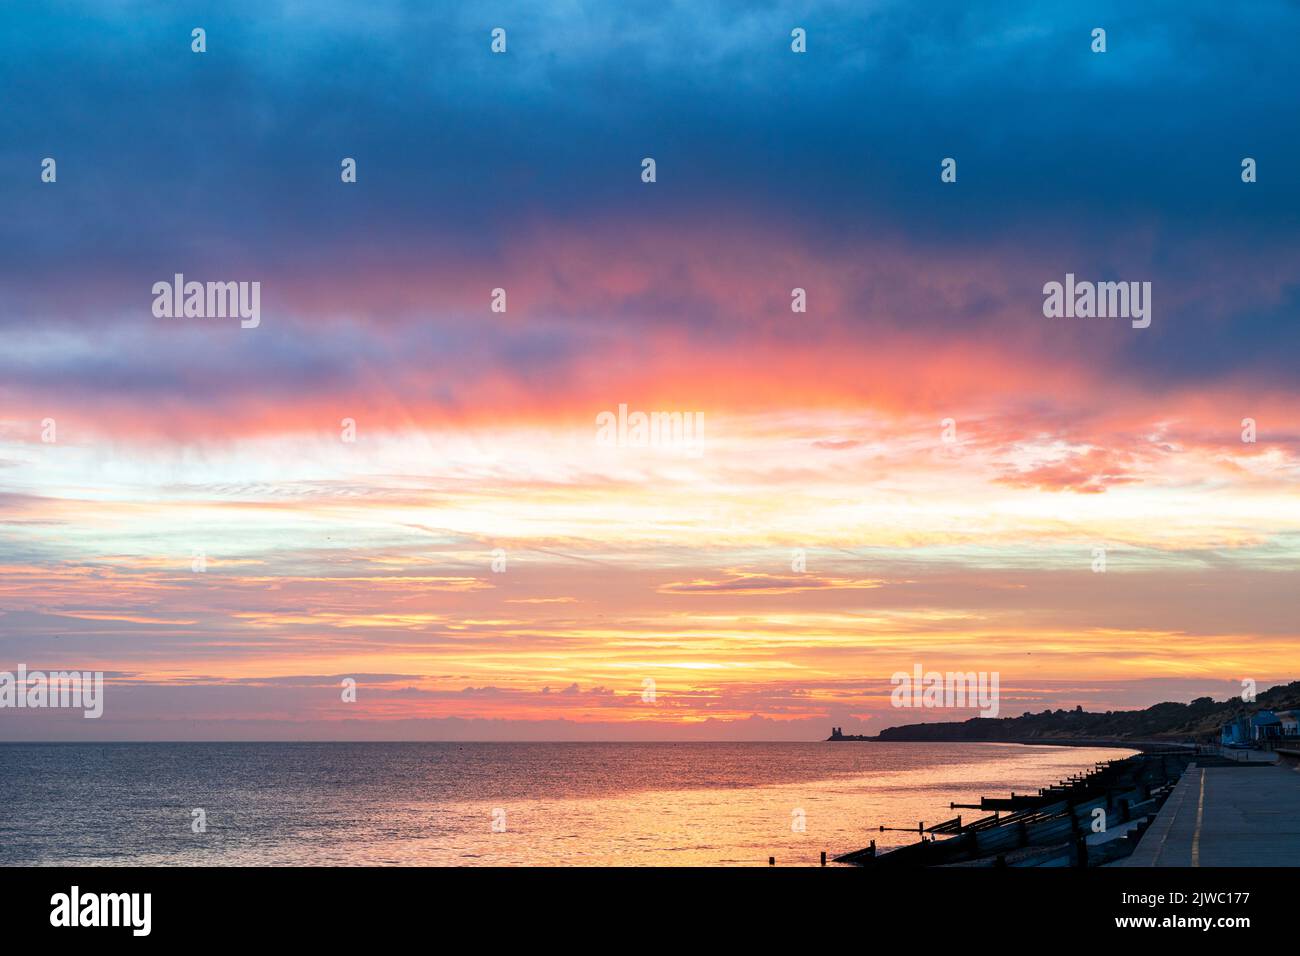 The dawn sky over the sea on the Kent coast at Reculver with the twin towers of the 12th century church silhouetted in the distance against an orange sky. In the foreground the silhouetted breakwaters, groynes, and beach at Henre Bay. Thick cloud overhead underlit by orange light. Stock Photo